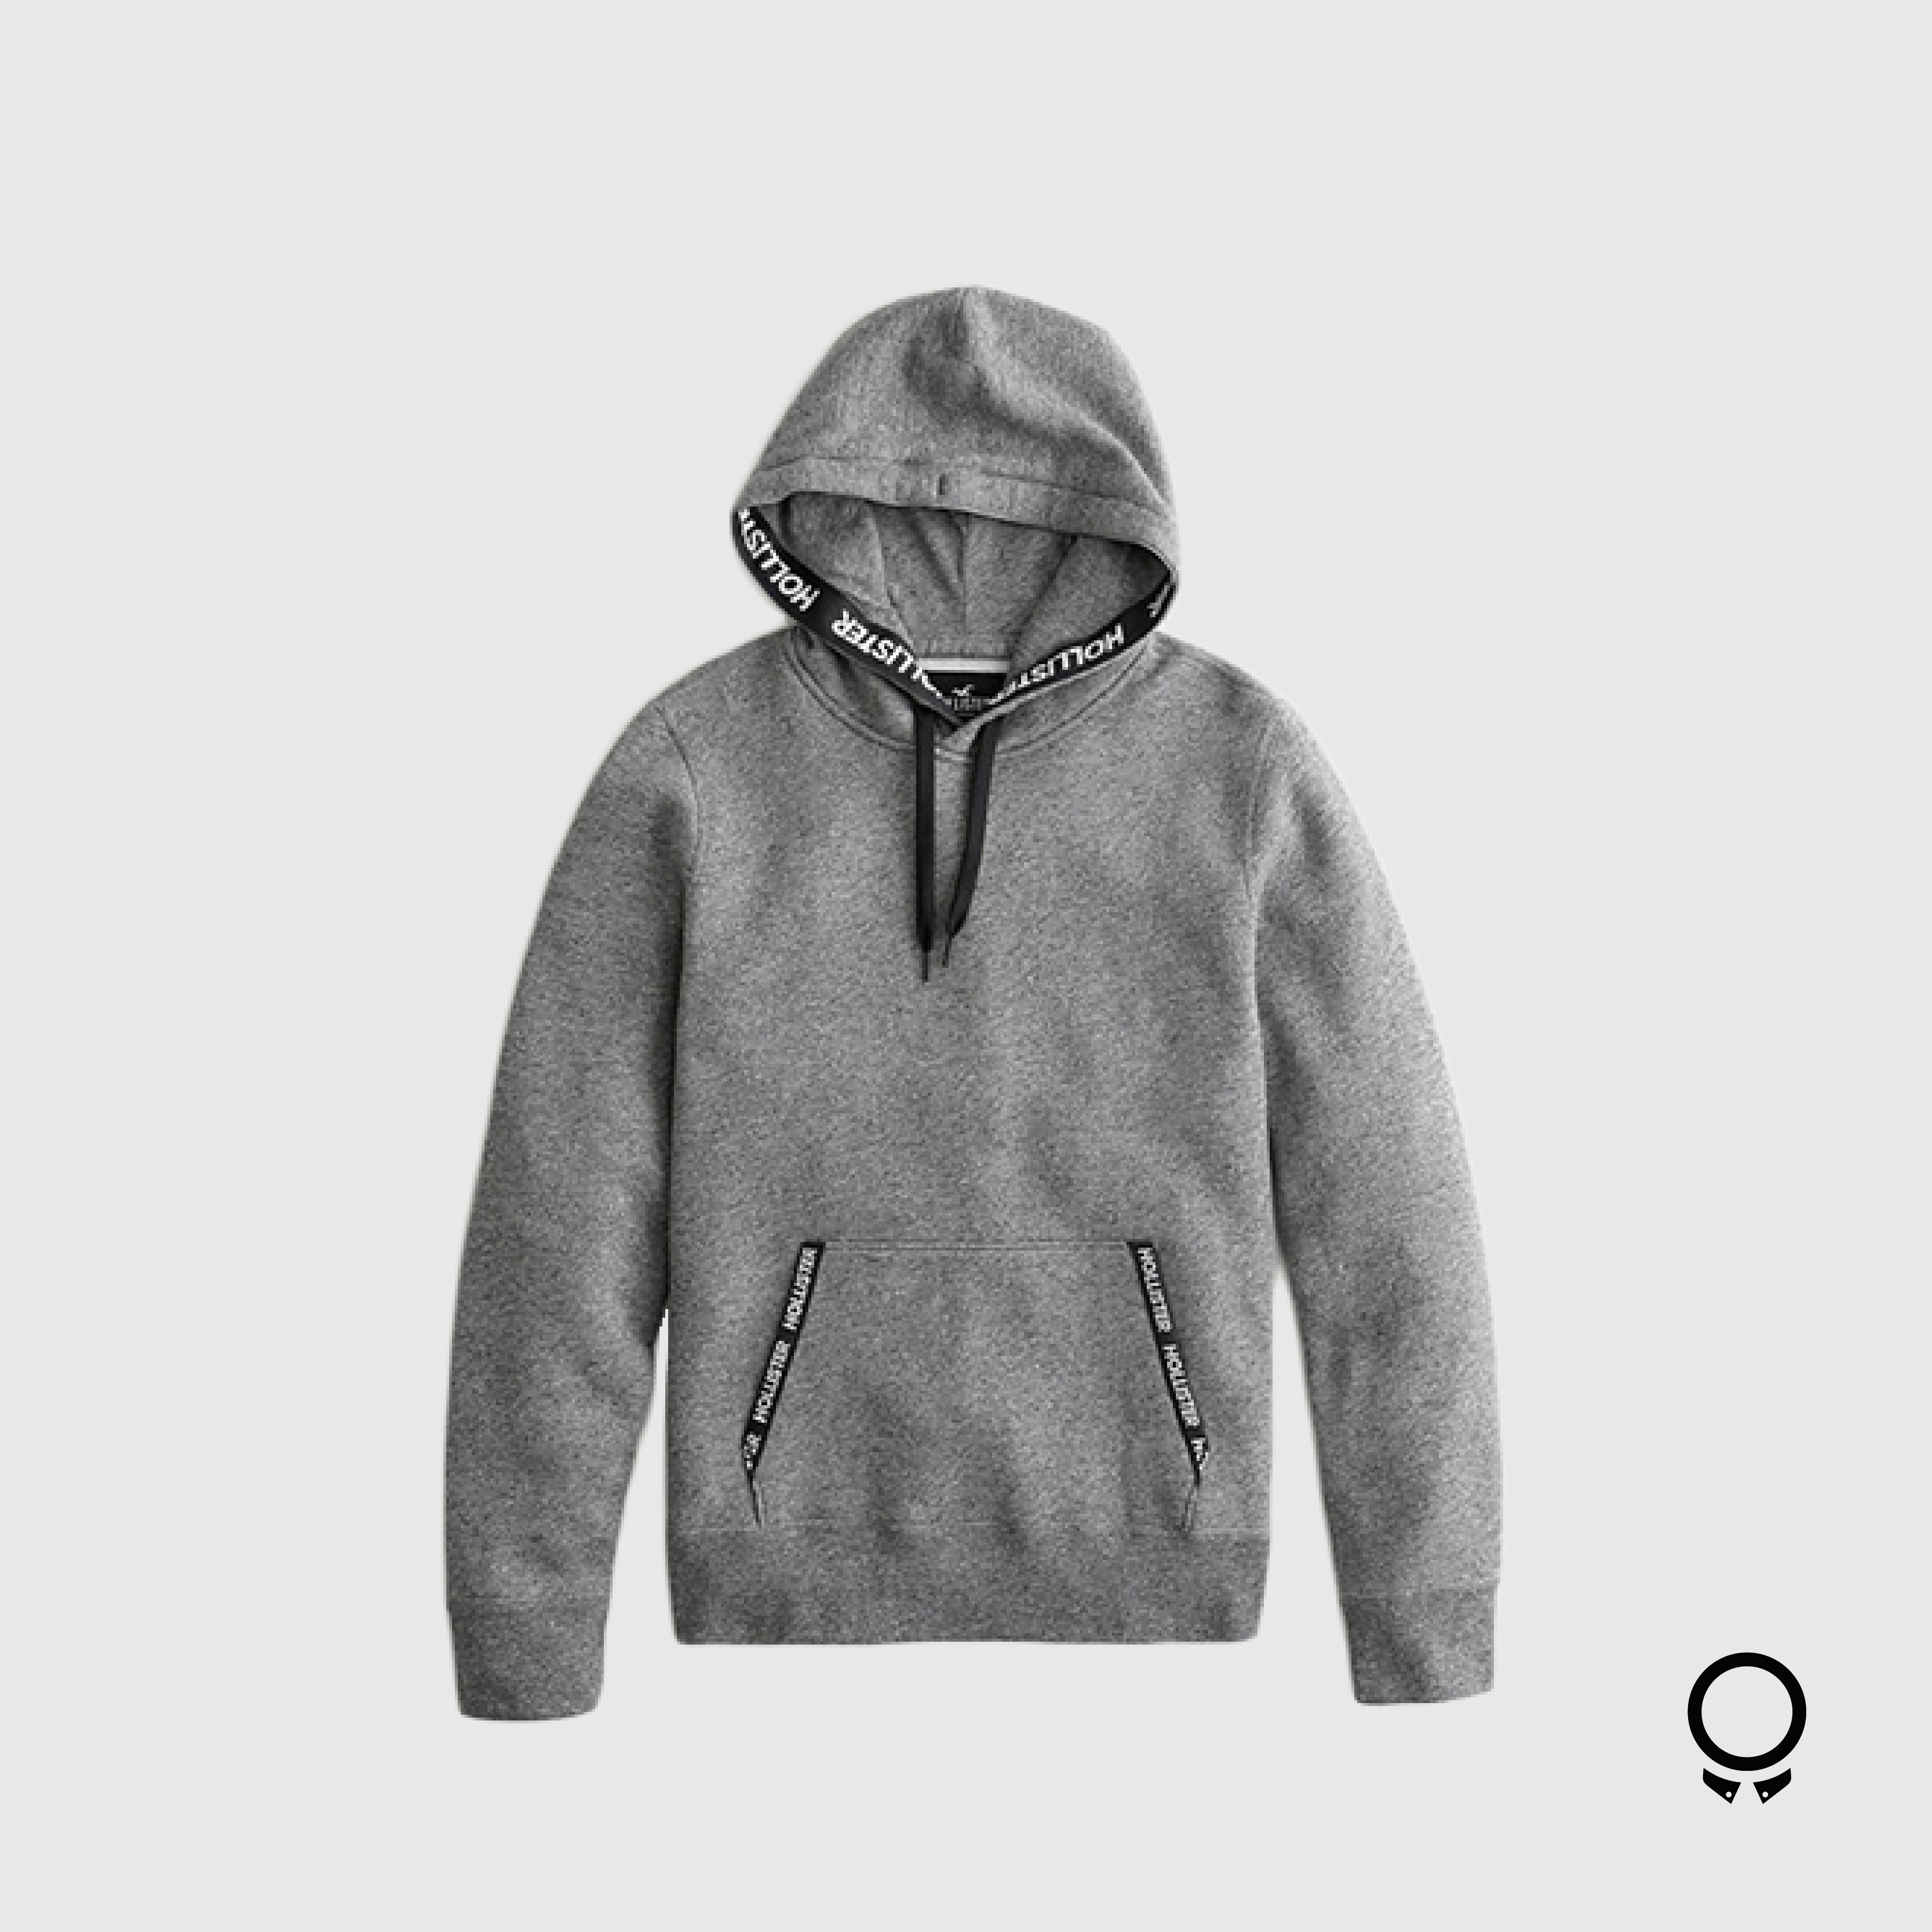 HOODIE HOLLISTER GRIS OSCURO